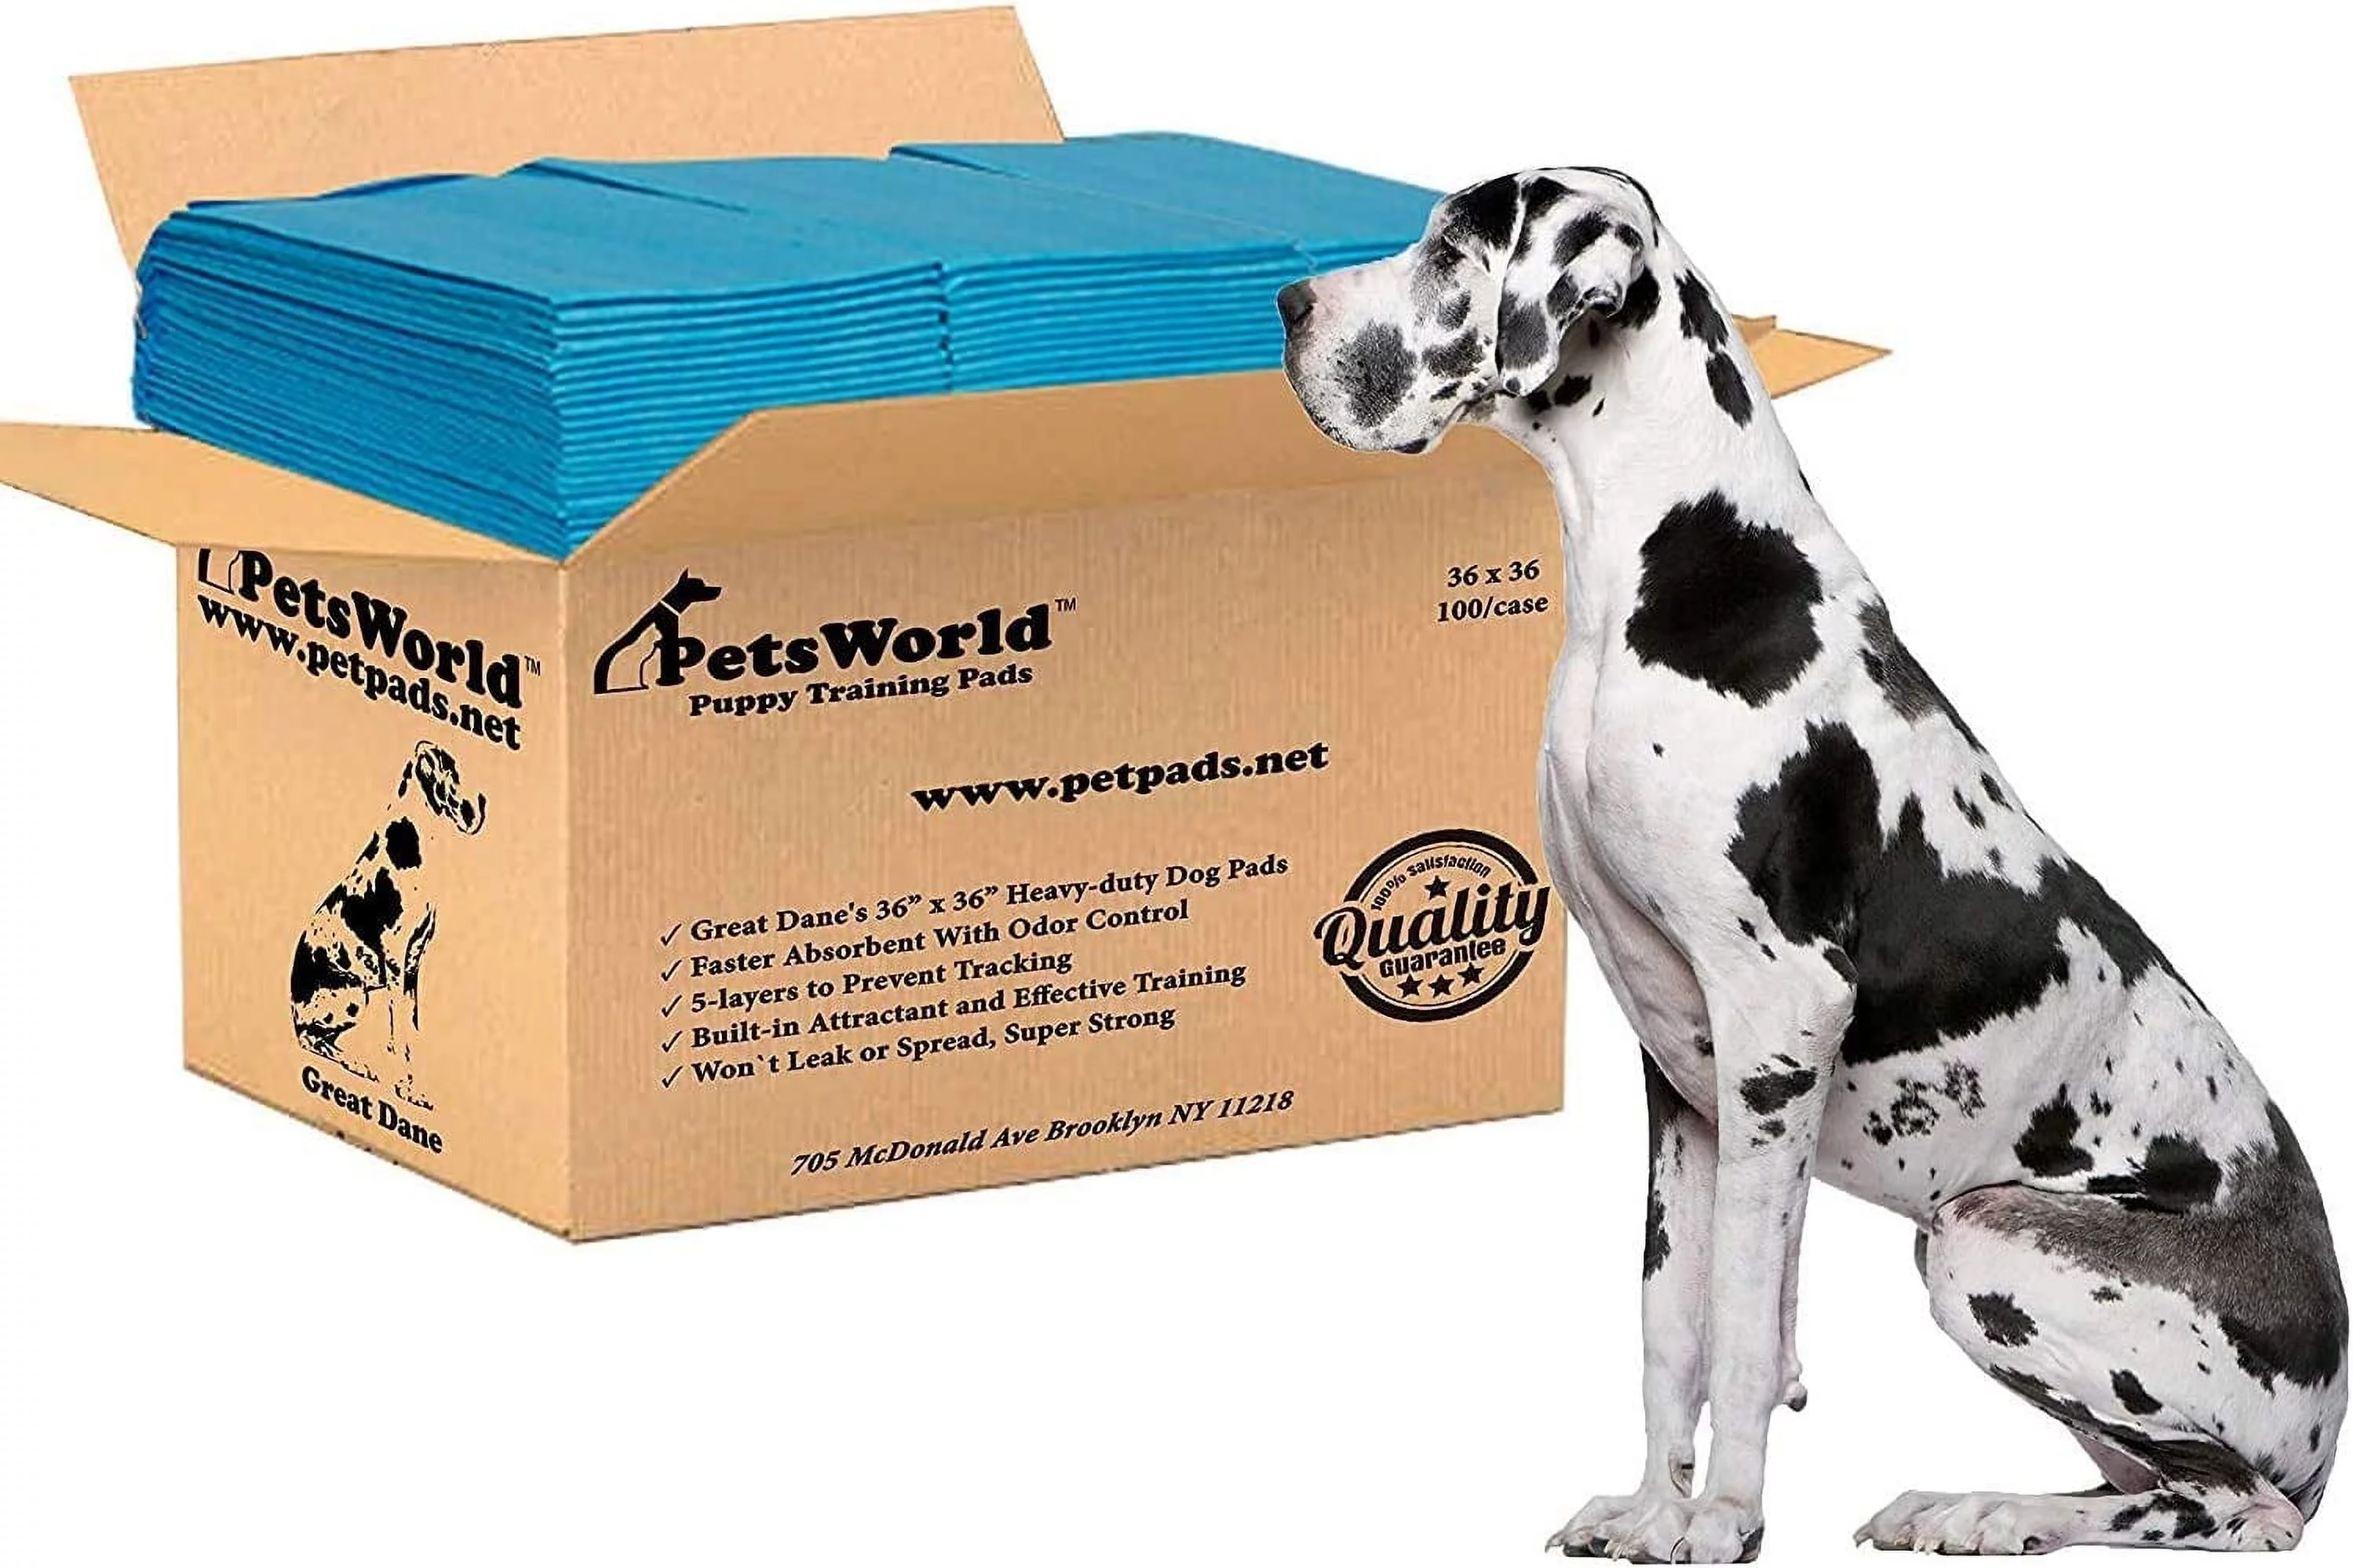 PETSWORLD Giant Potty Pads for Dogs, 36" x 36", 100 Count, 5 Layer Disposable Pads